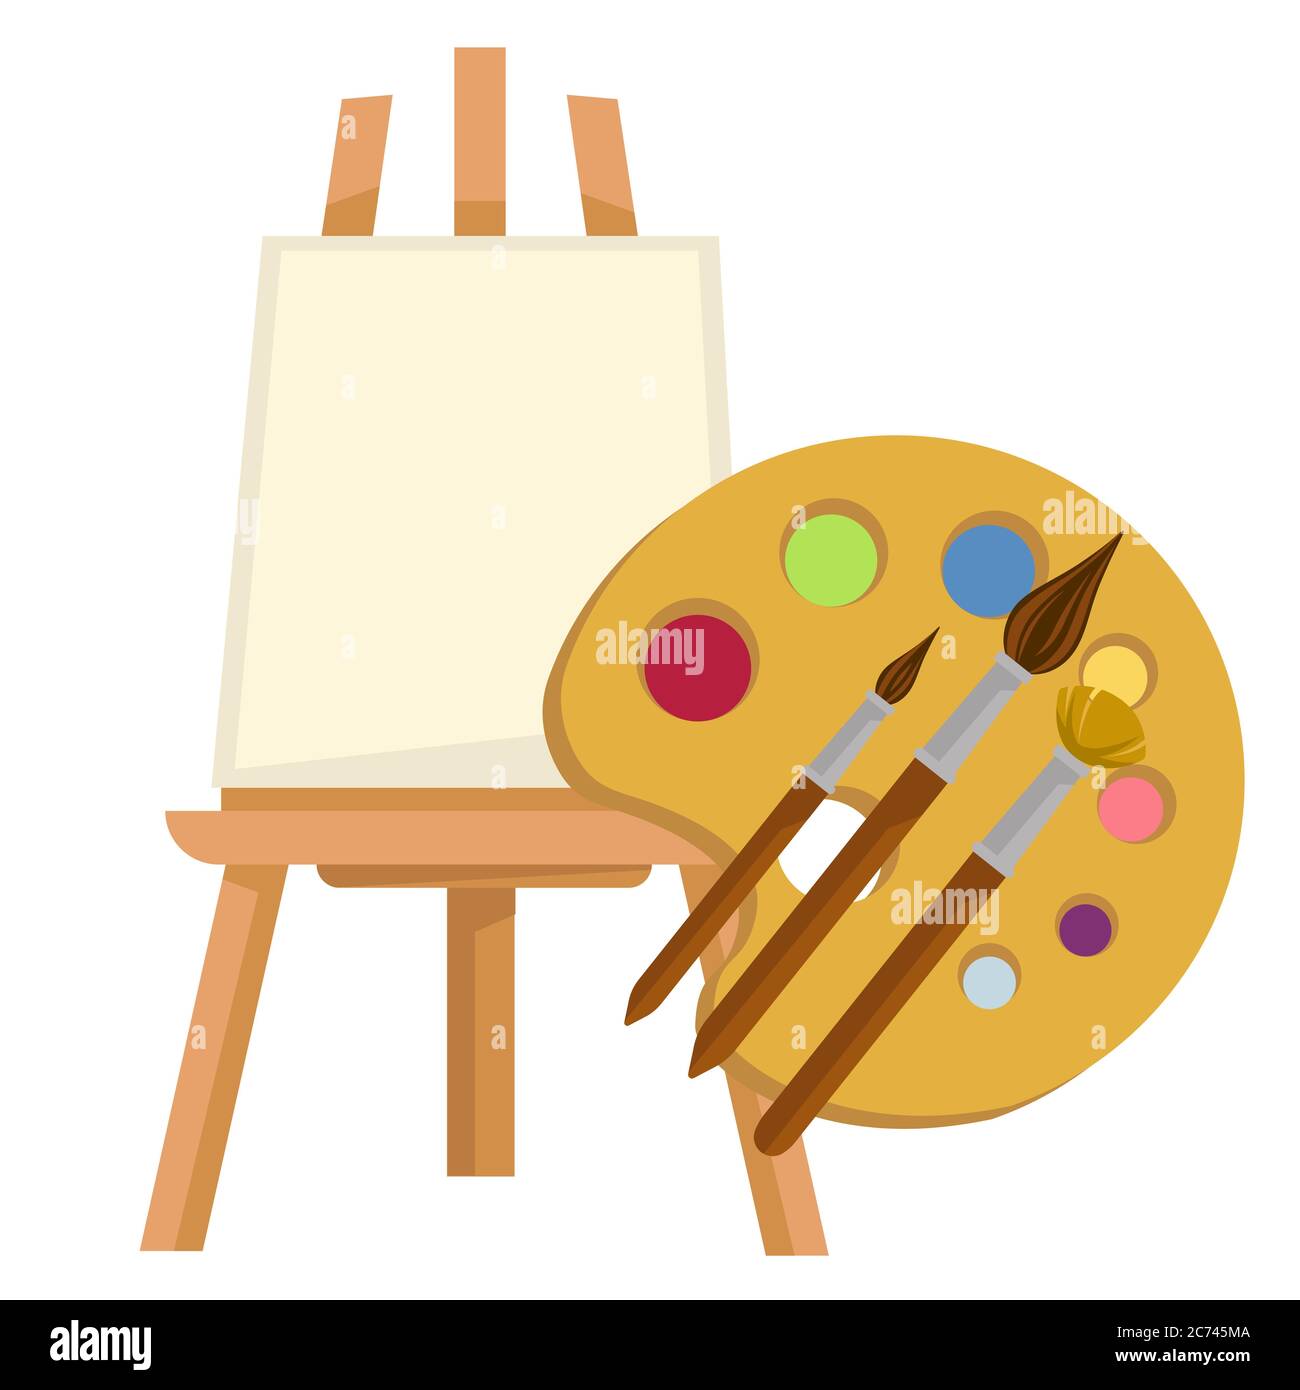 Easel Painting Cliparts, Stock Vector and Royalty Free Easel